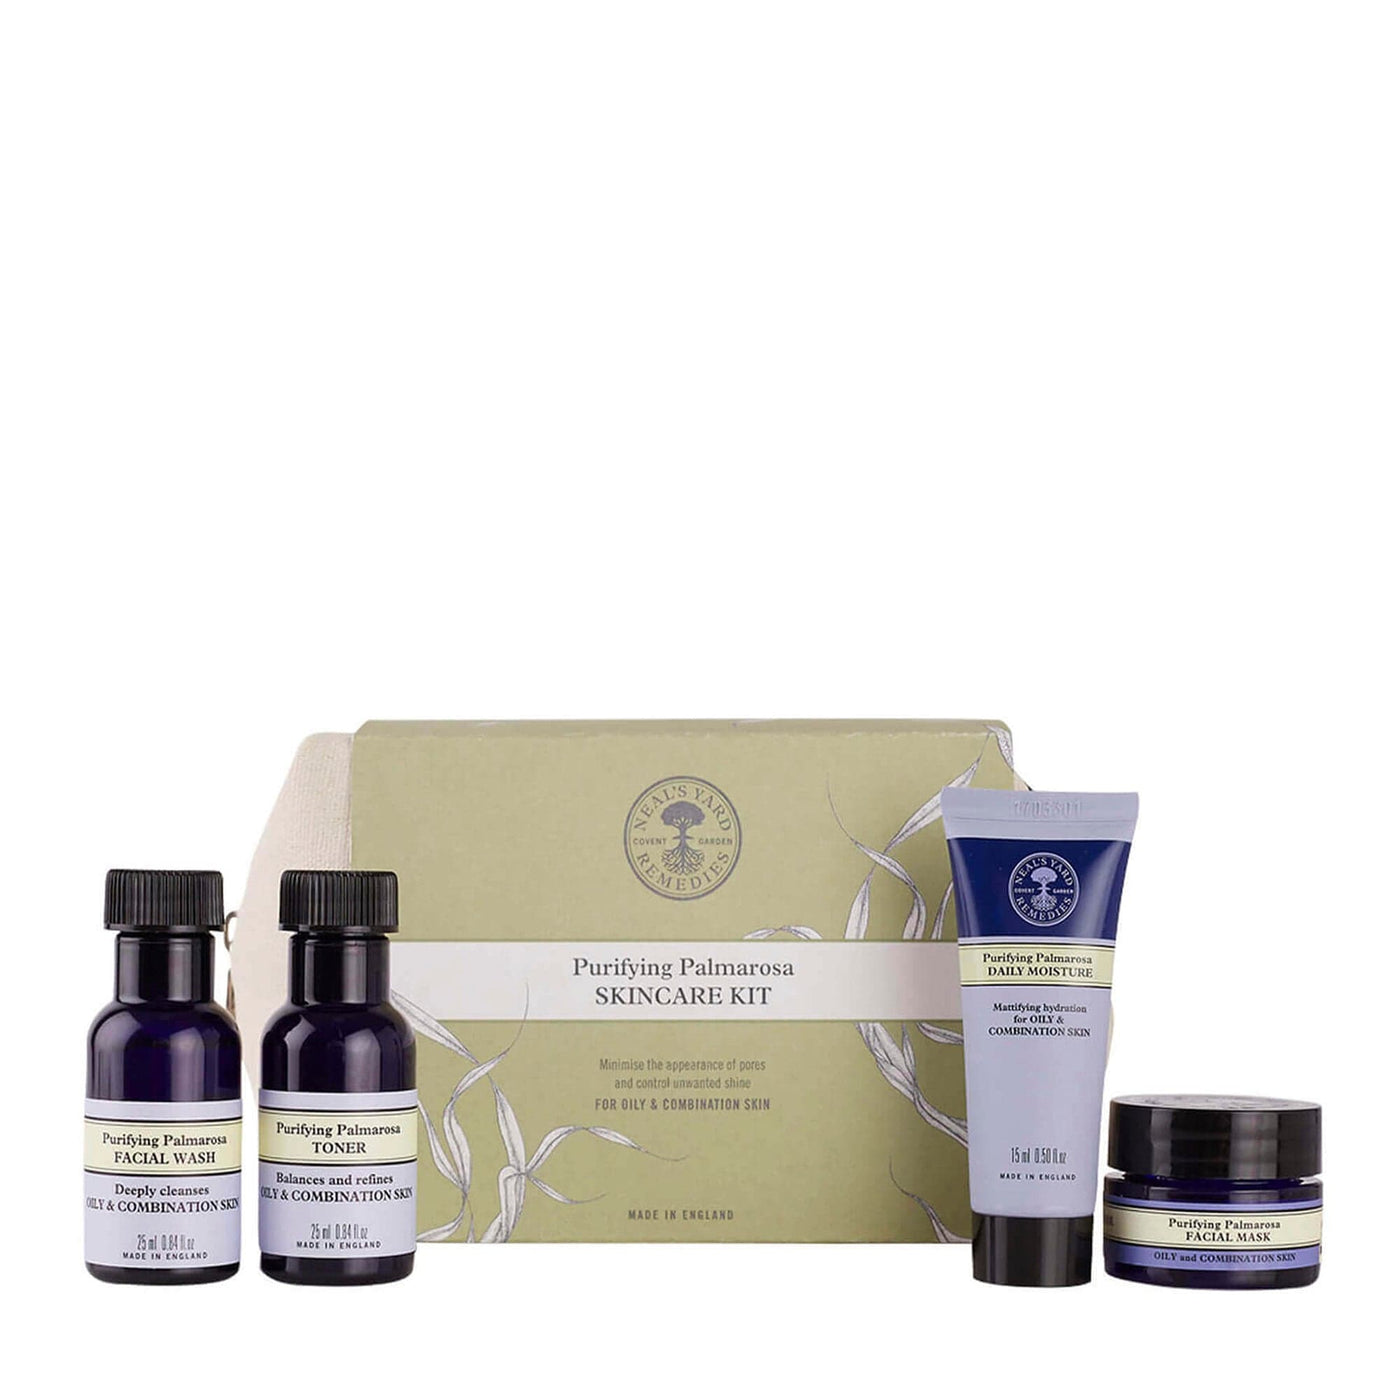 Neal's Yard Remedies Gifts & Collections Purifying Palmarosa Skincare Kit